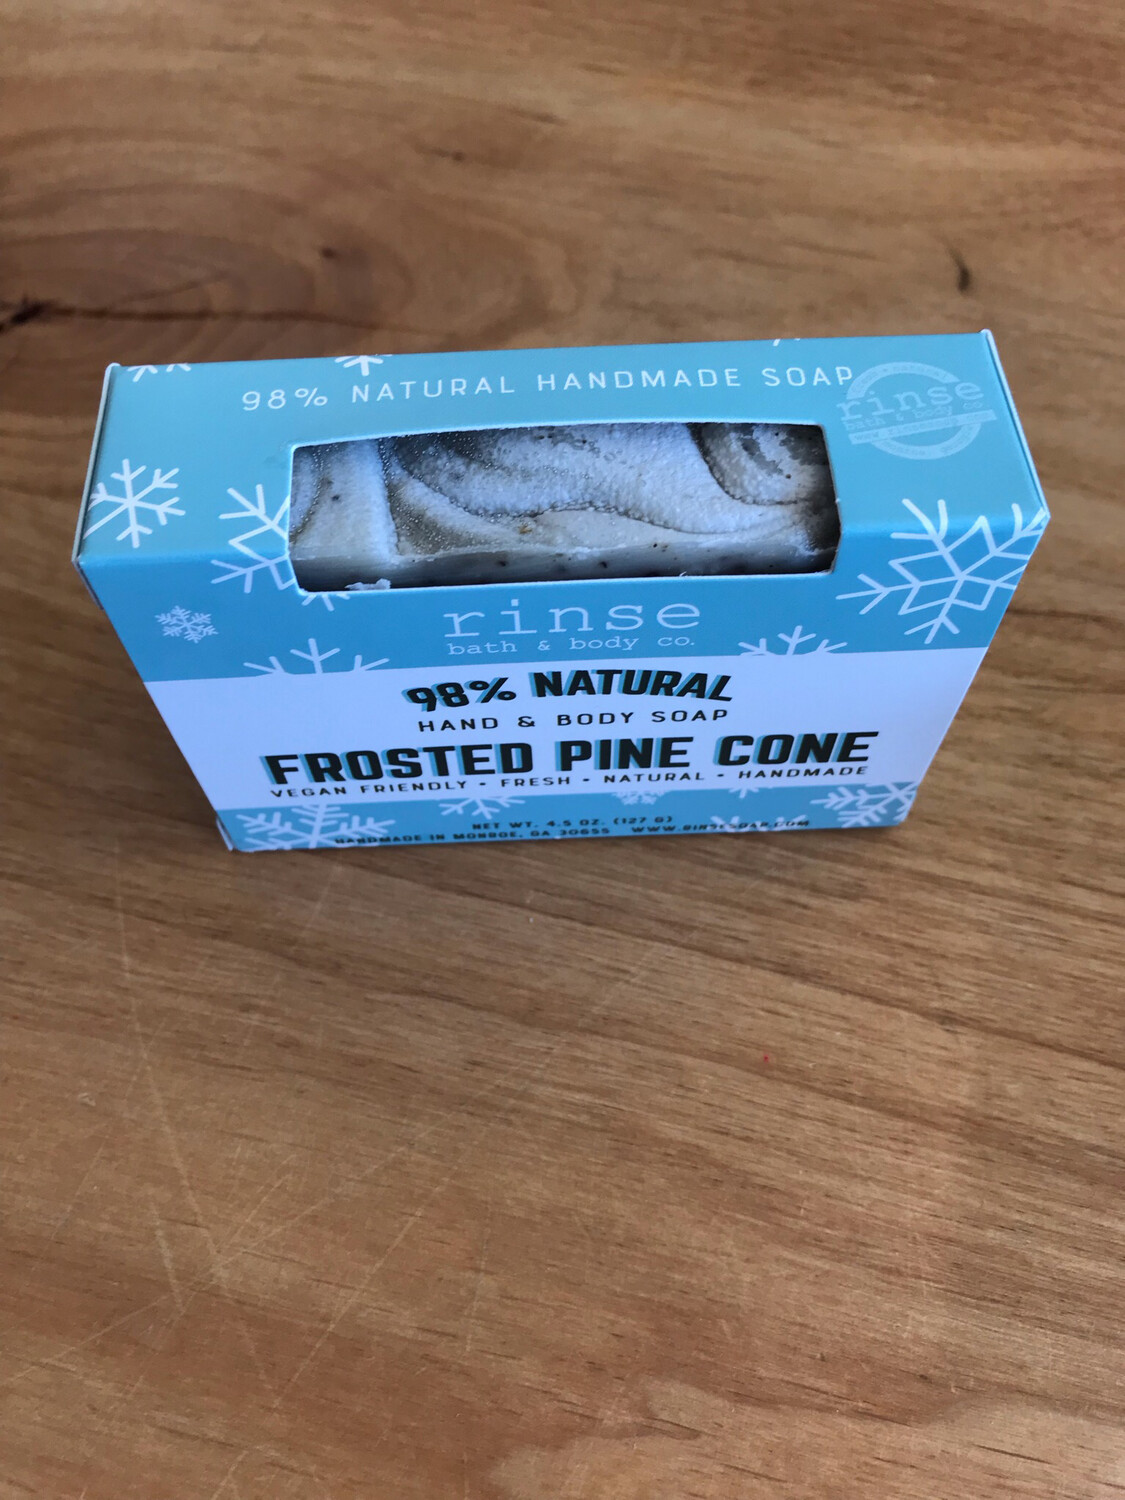 Frosted Pine Handmade Soap